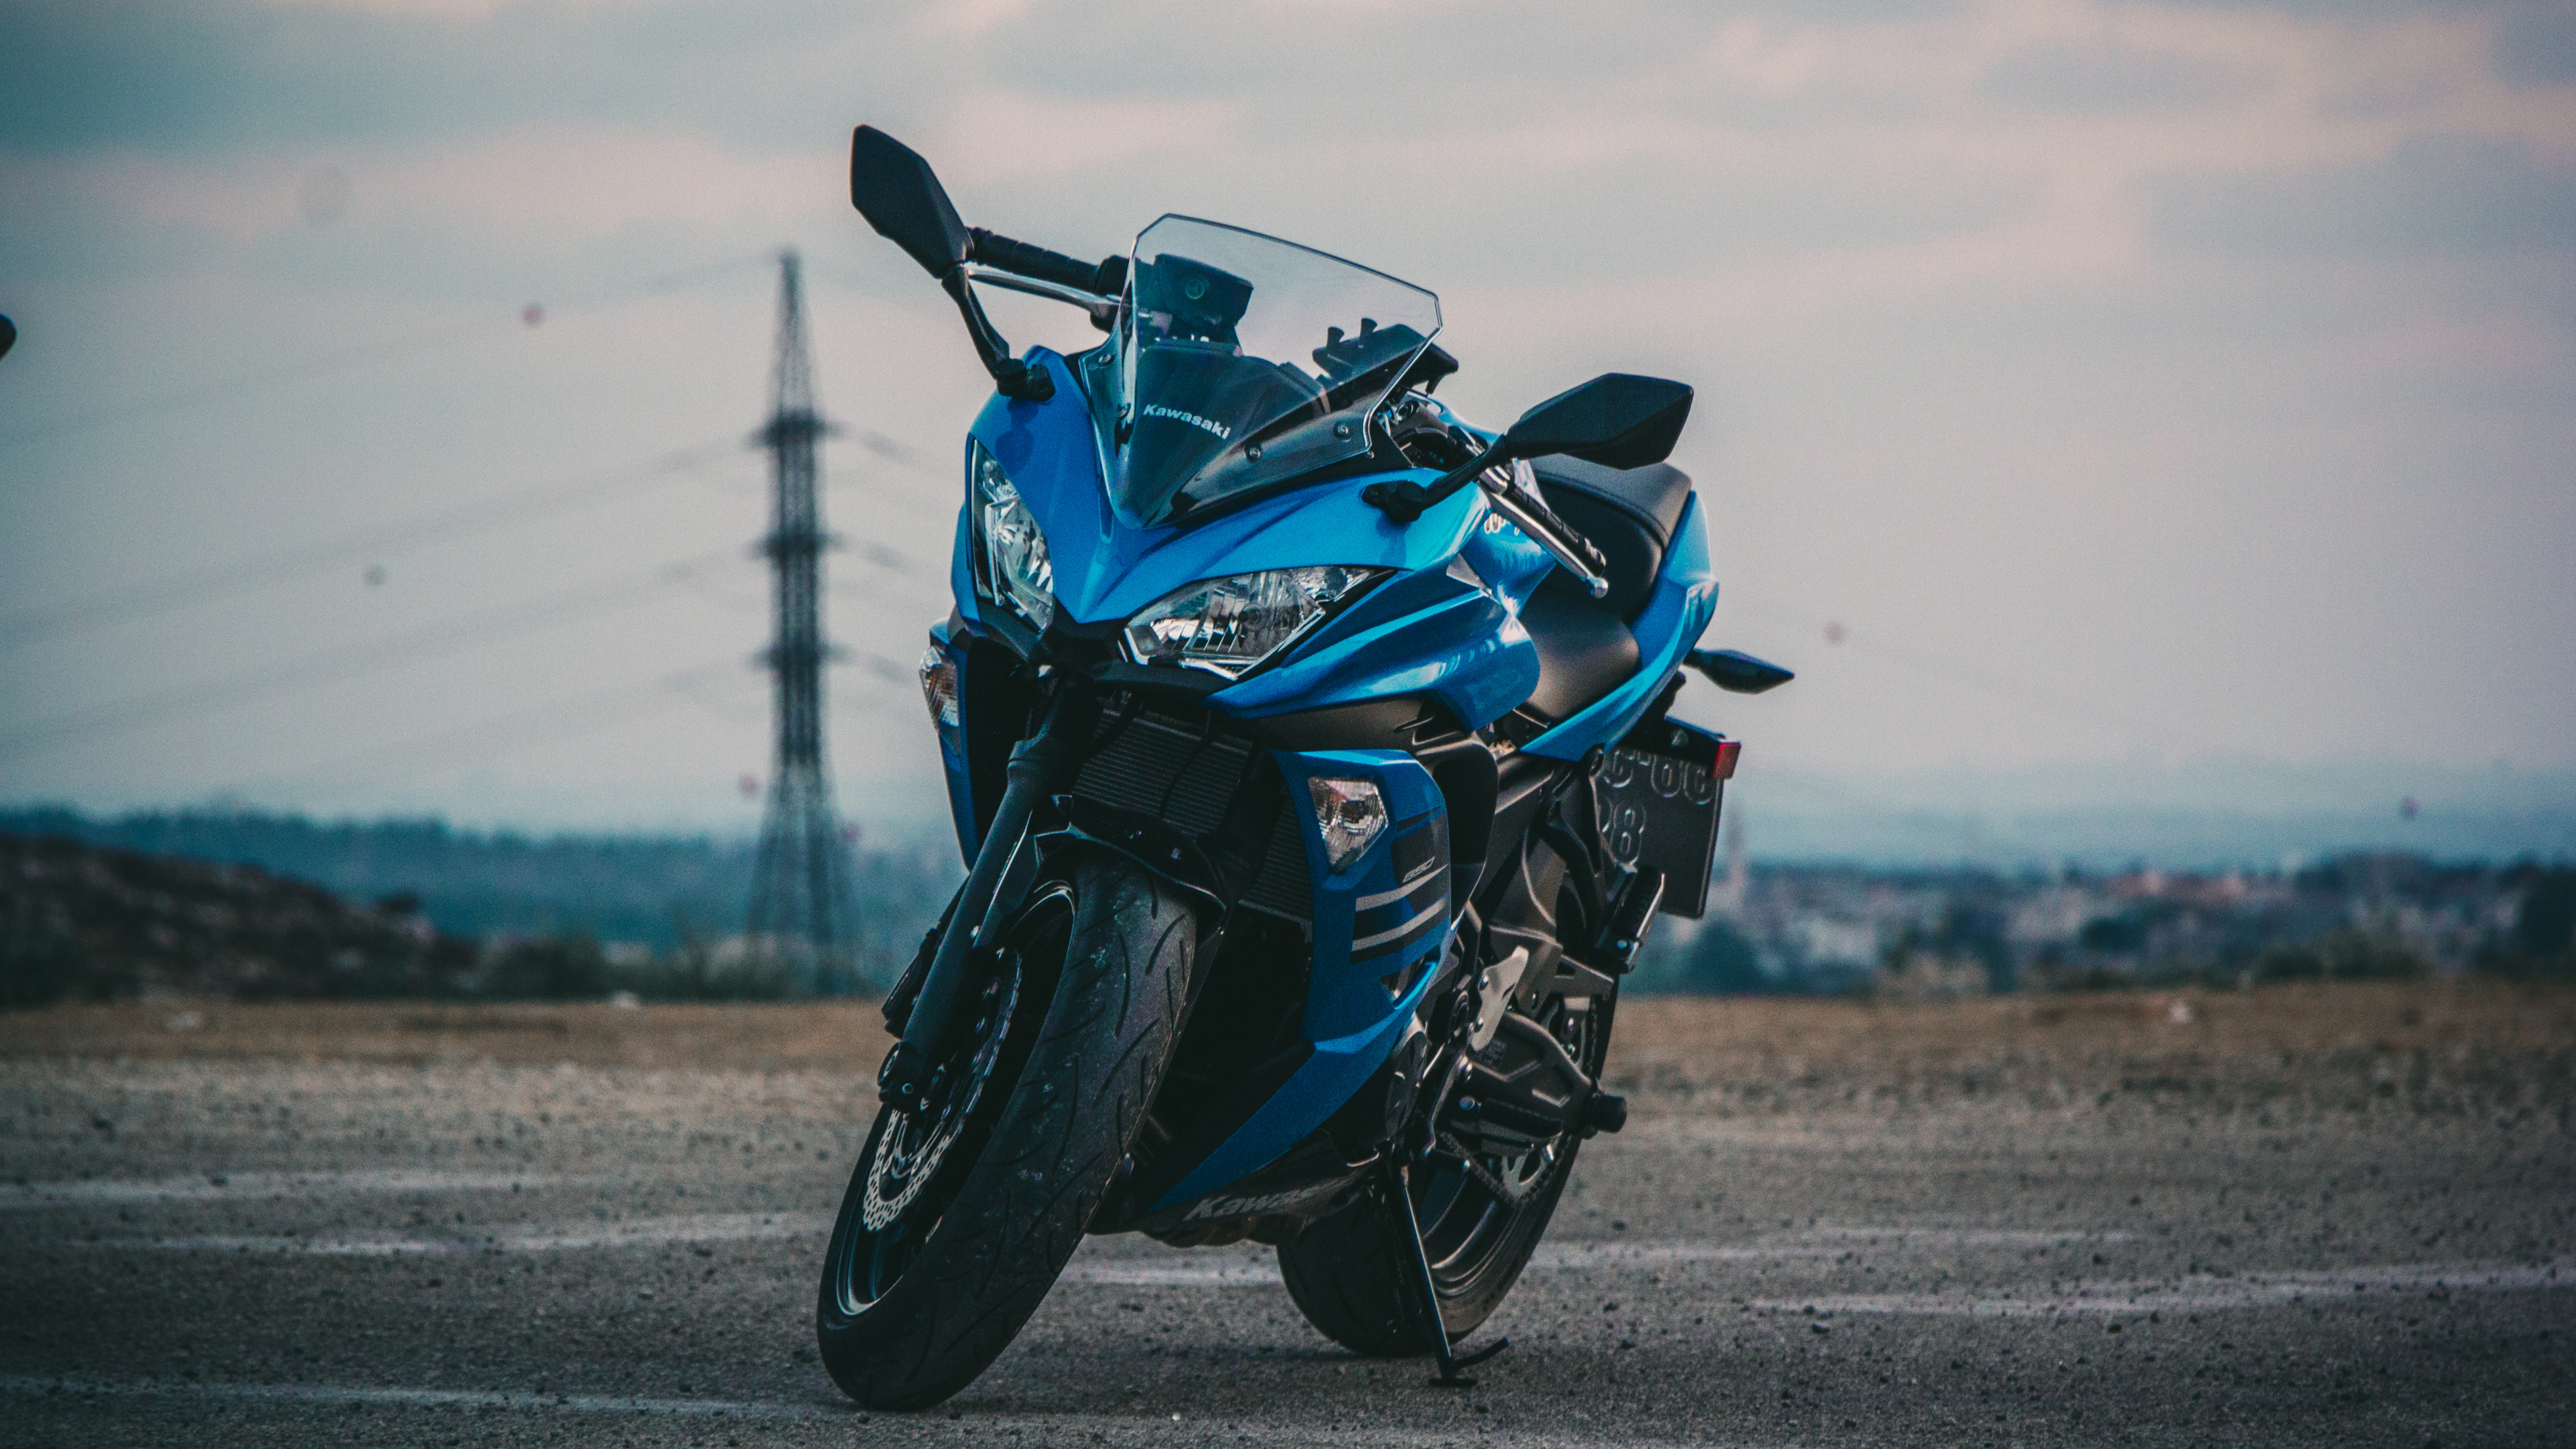 Blue and Black Sports Bike on Gray Asphalt Road During Daytime. Wallpaper in 3840x2160 Resolution